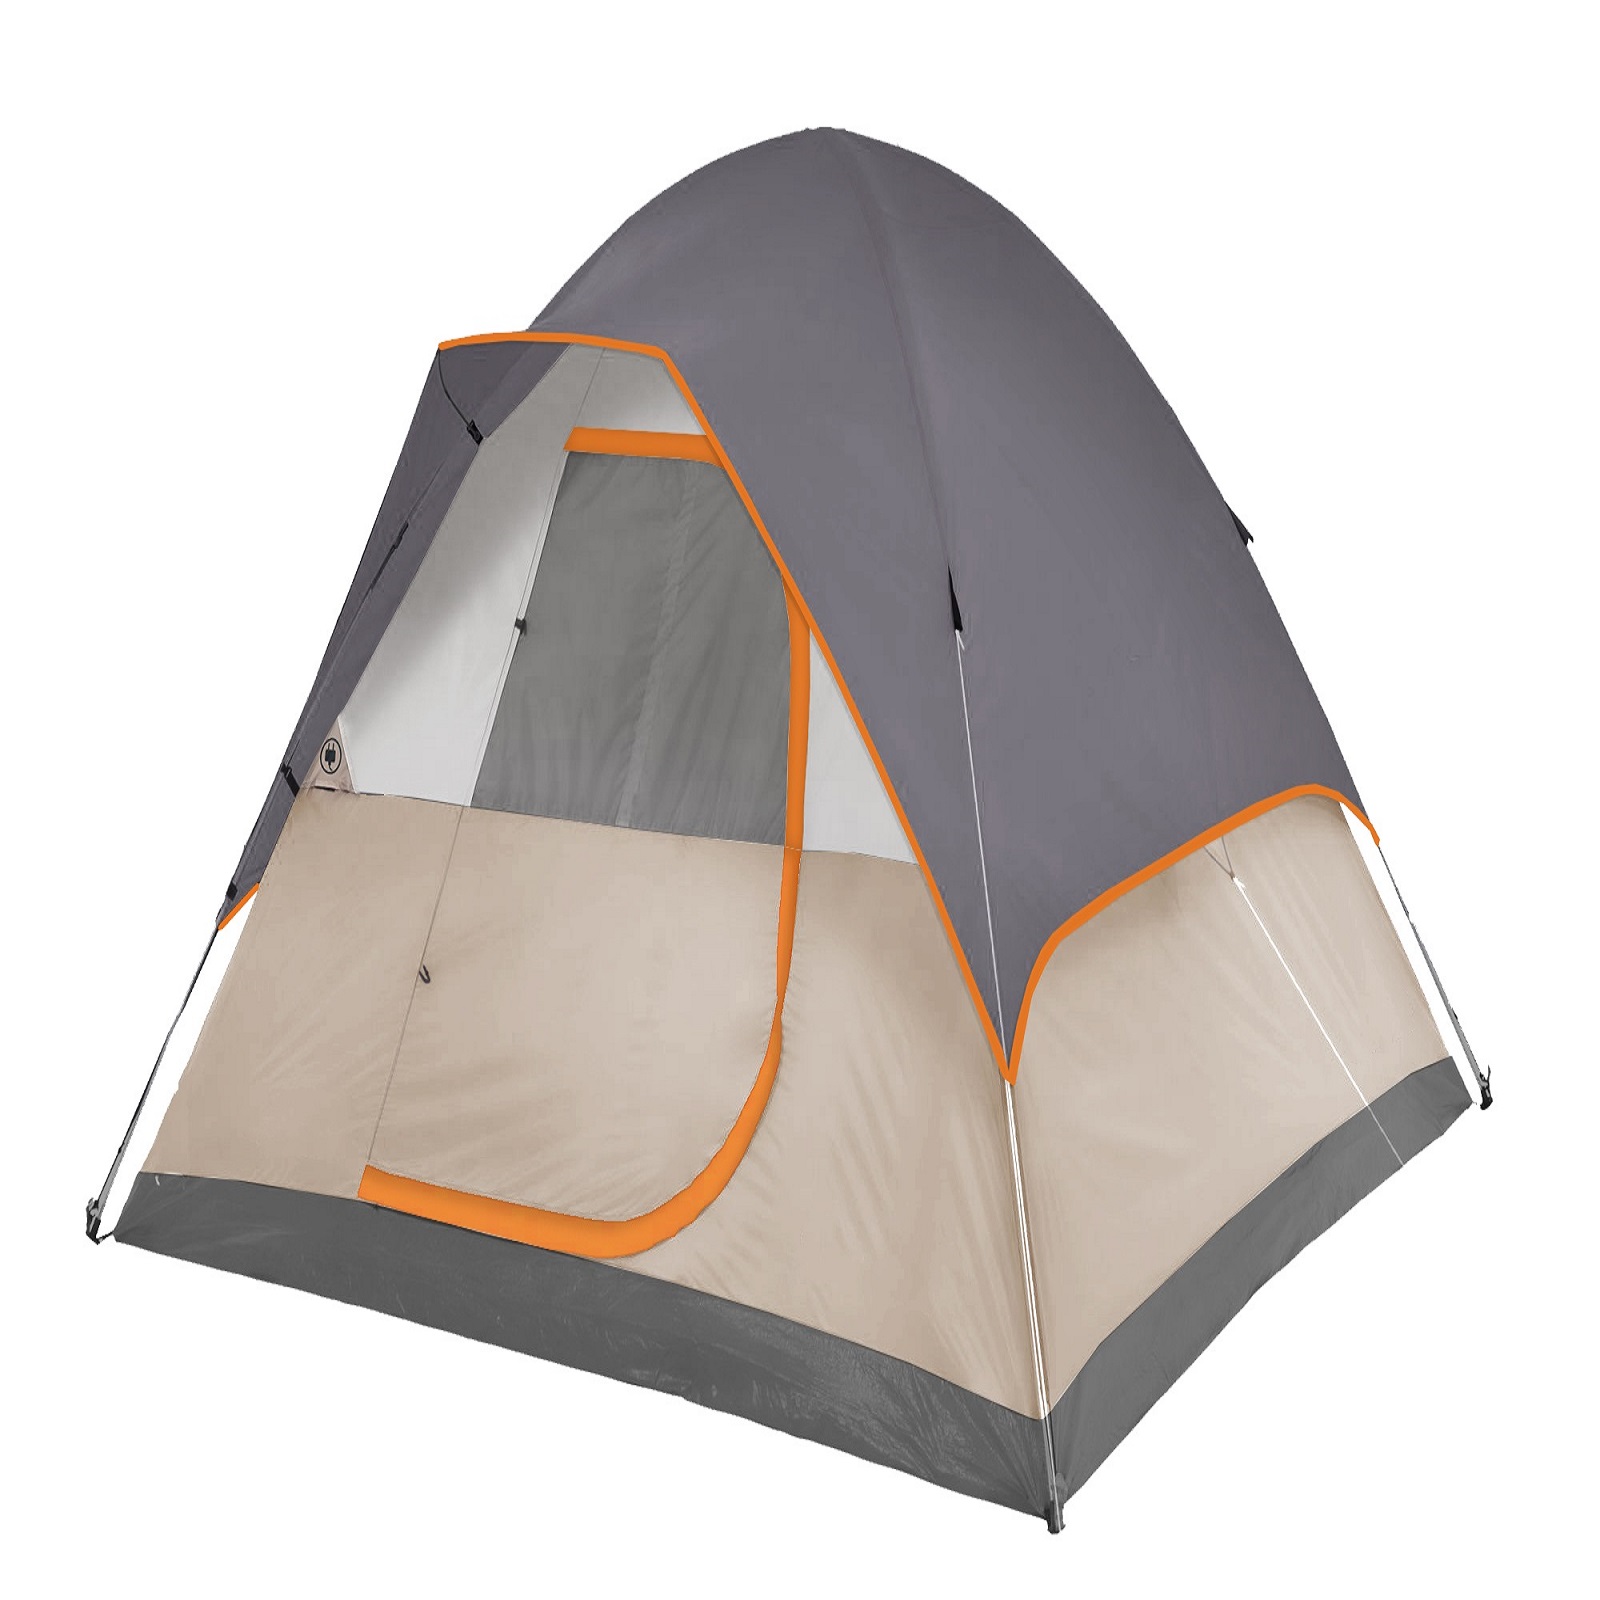 World Famous Sports 5-Person Dome Camping Tent with Rain Fly